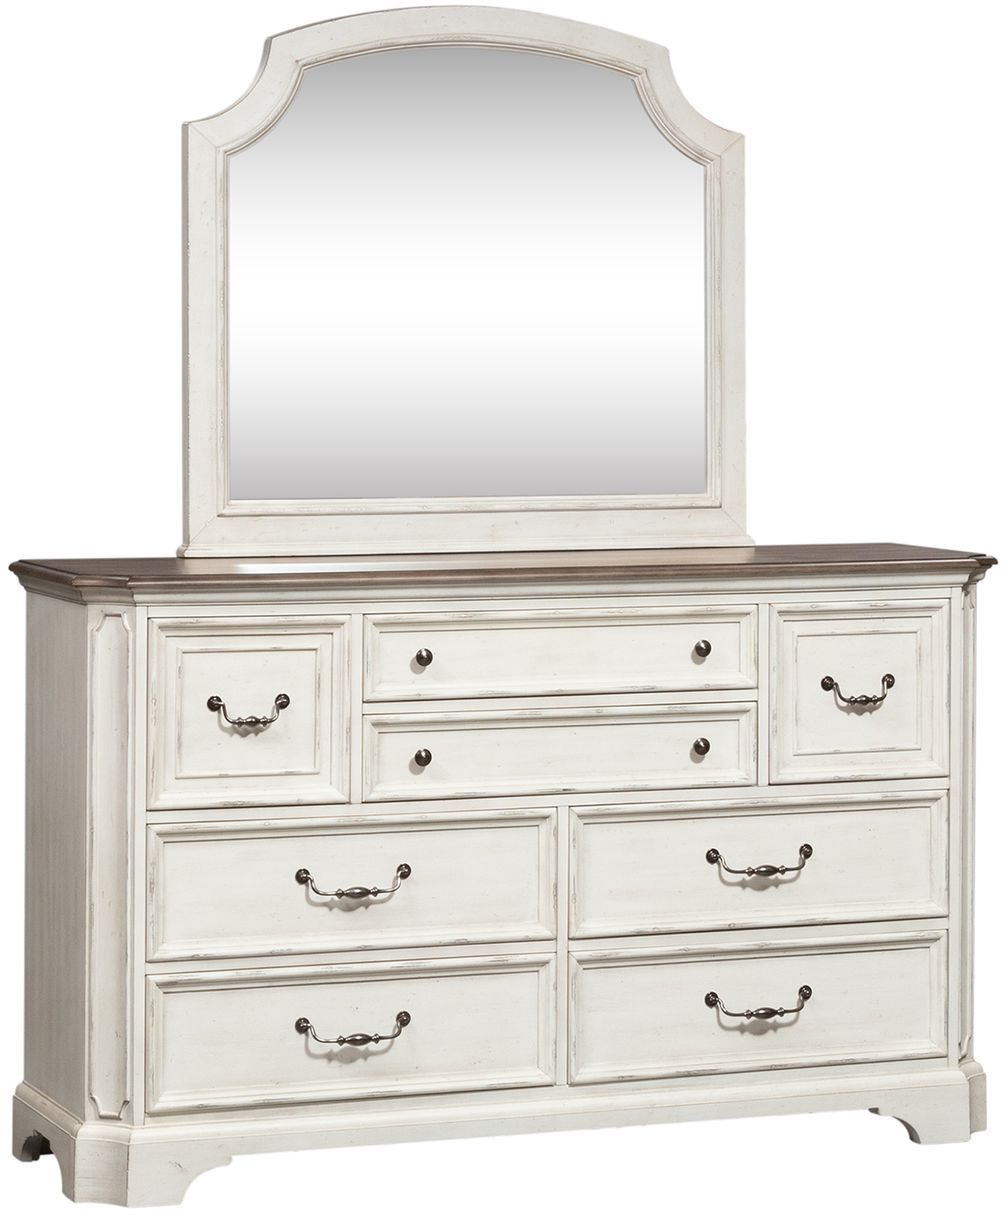 Liberty Furniture Abbey Road White Dresser and Mirror